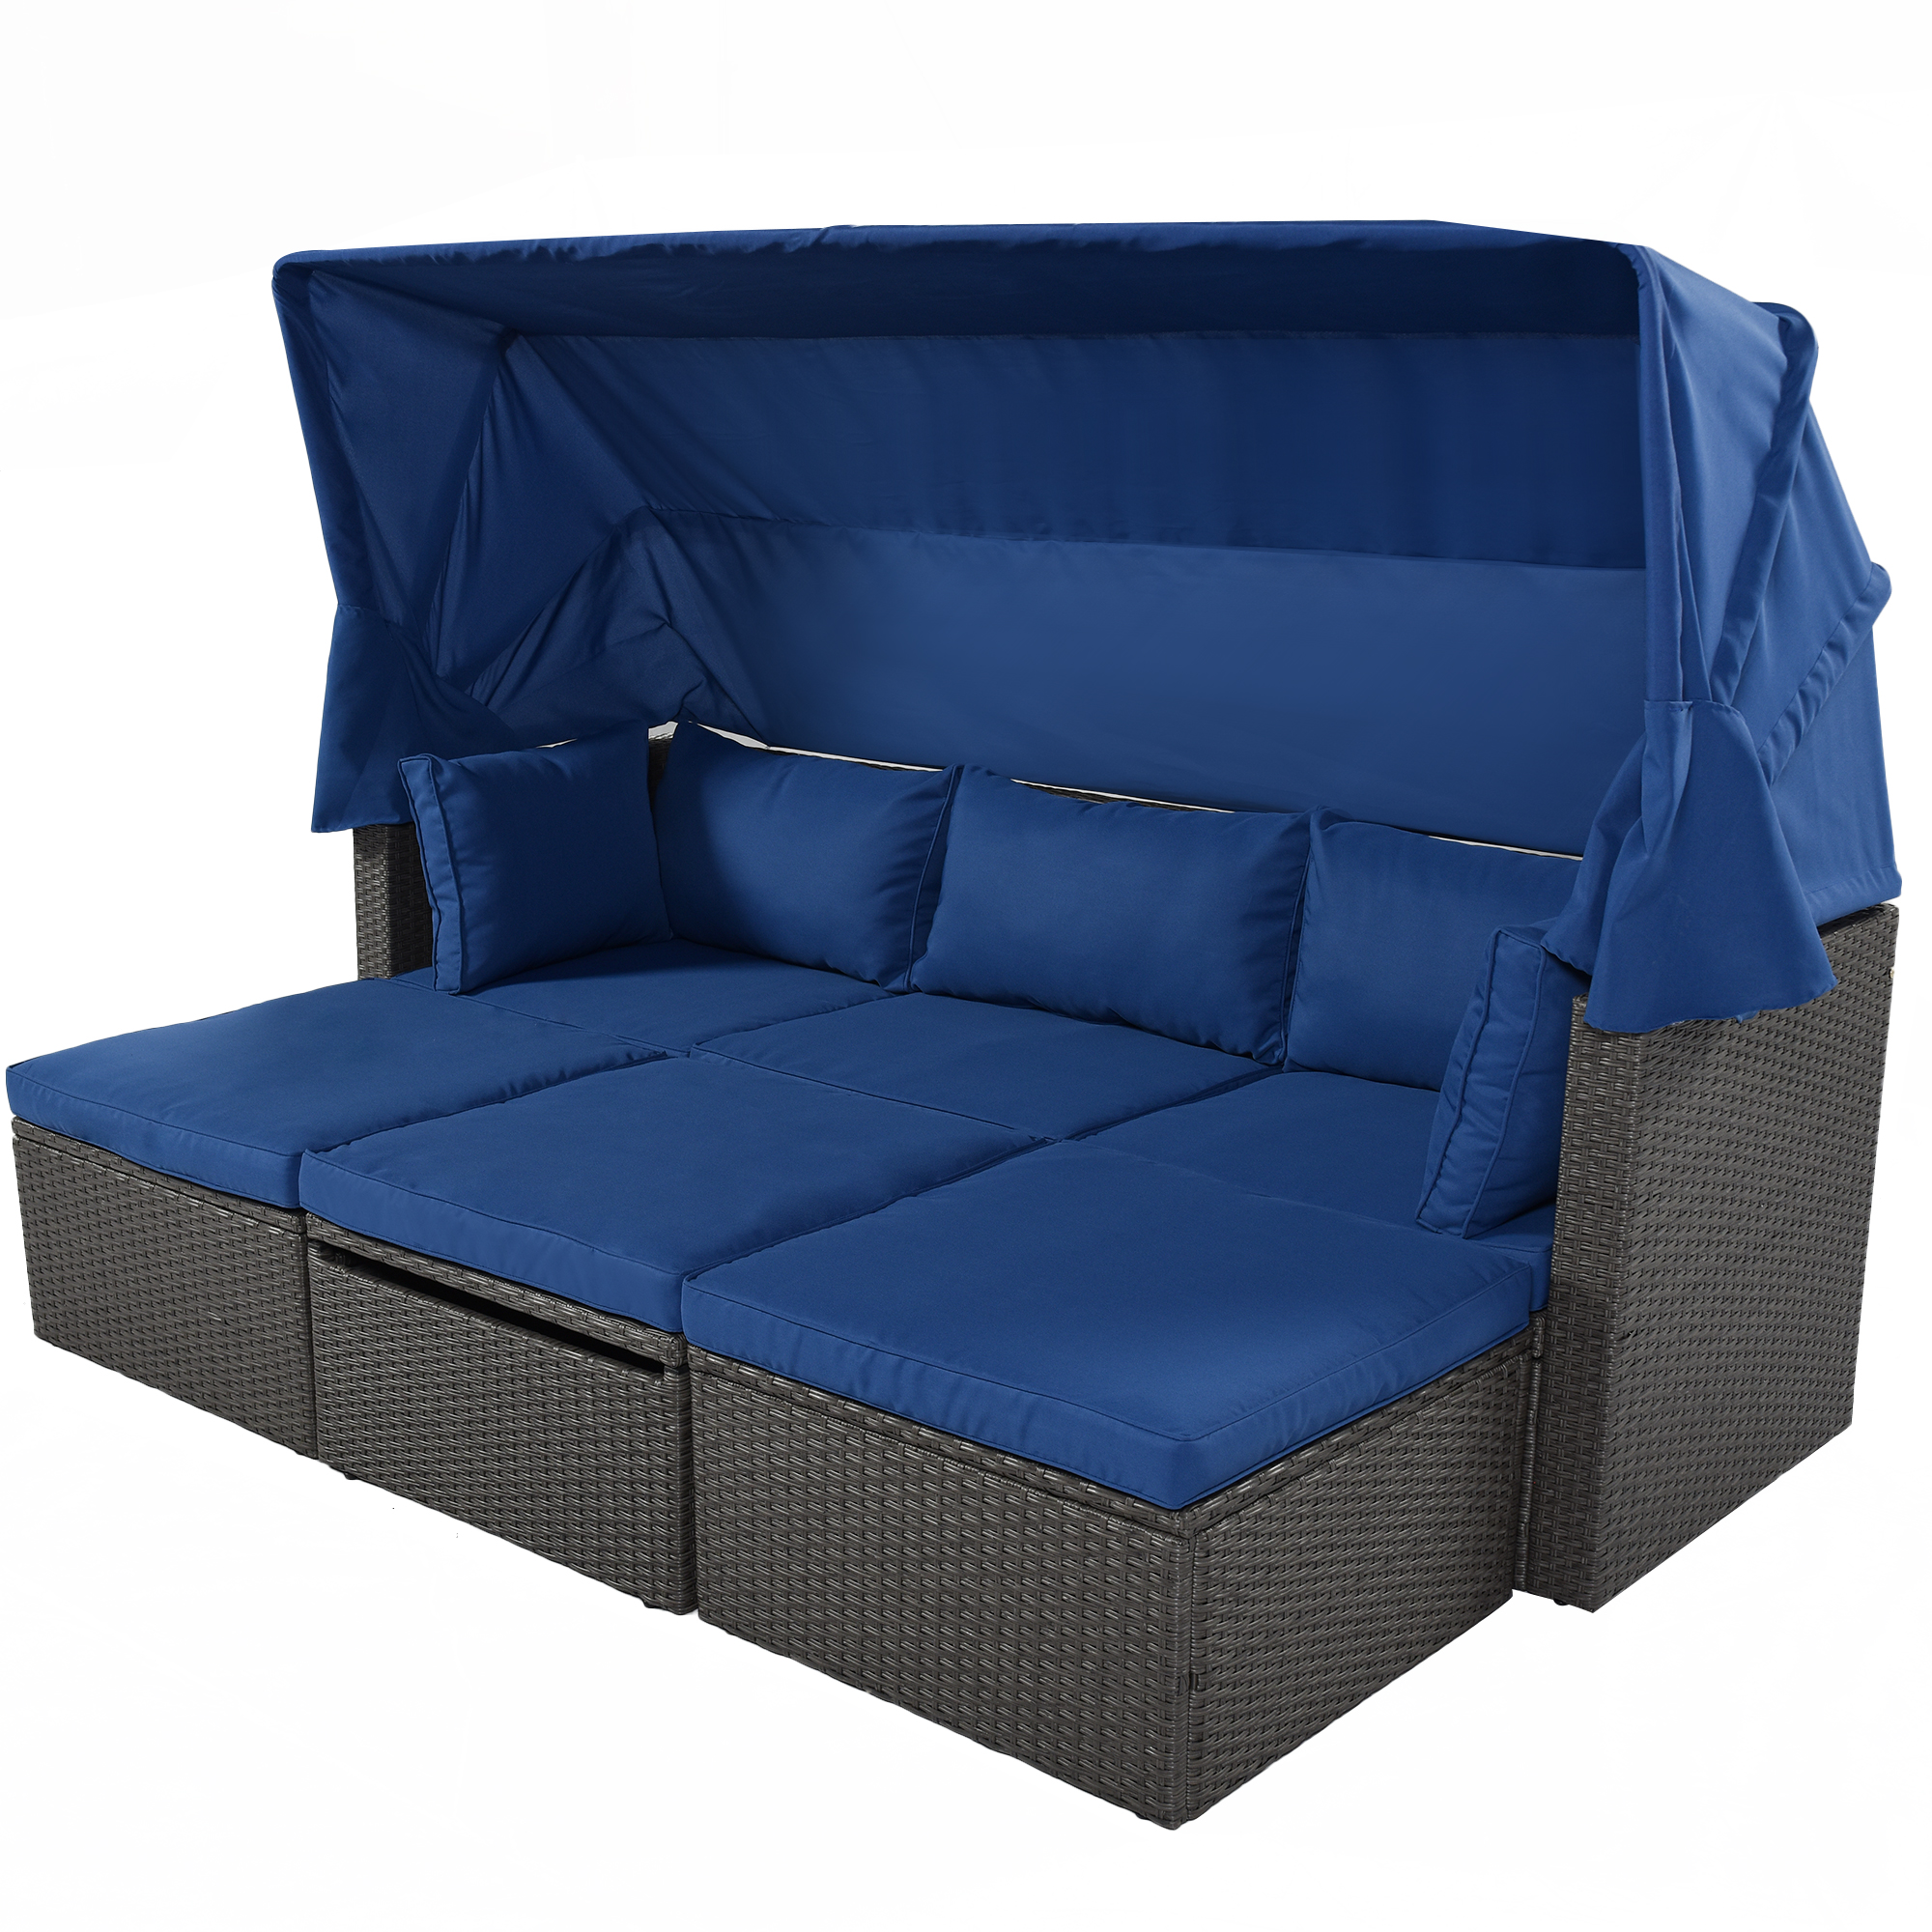 Outdoor Patio Rectangle Daybed with Retractable Canopy,  Wicker Furniture Sectional Seating with Washable Cushions, Backyard, Porch-CASAINC